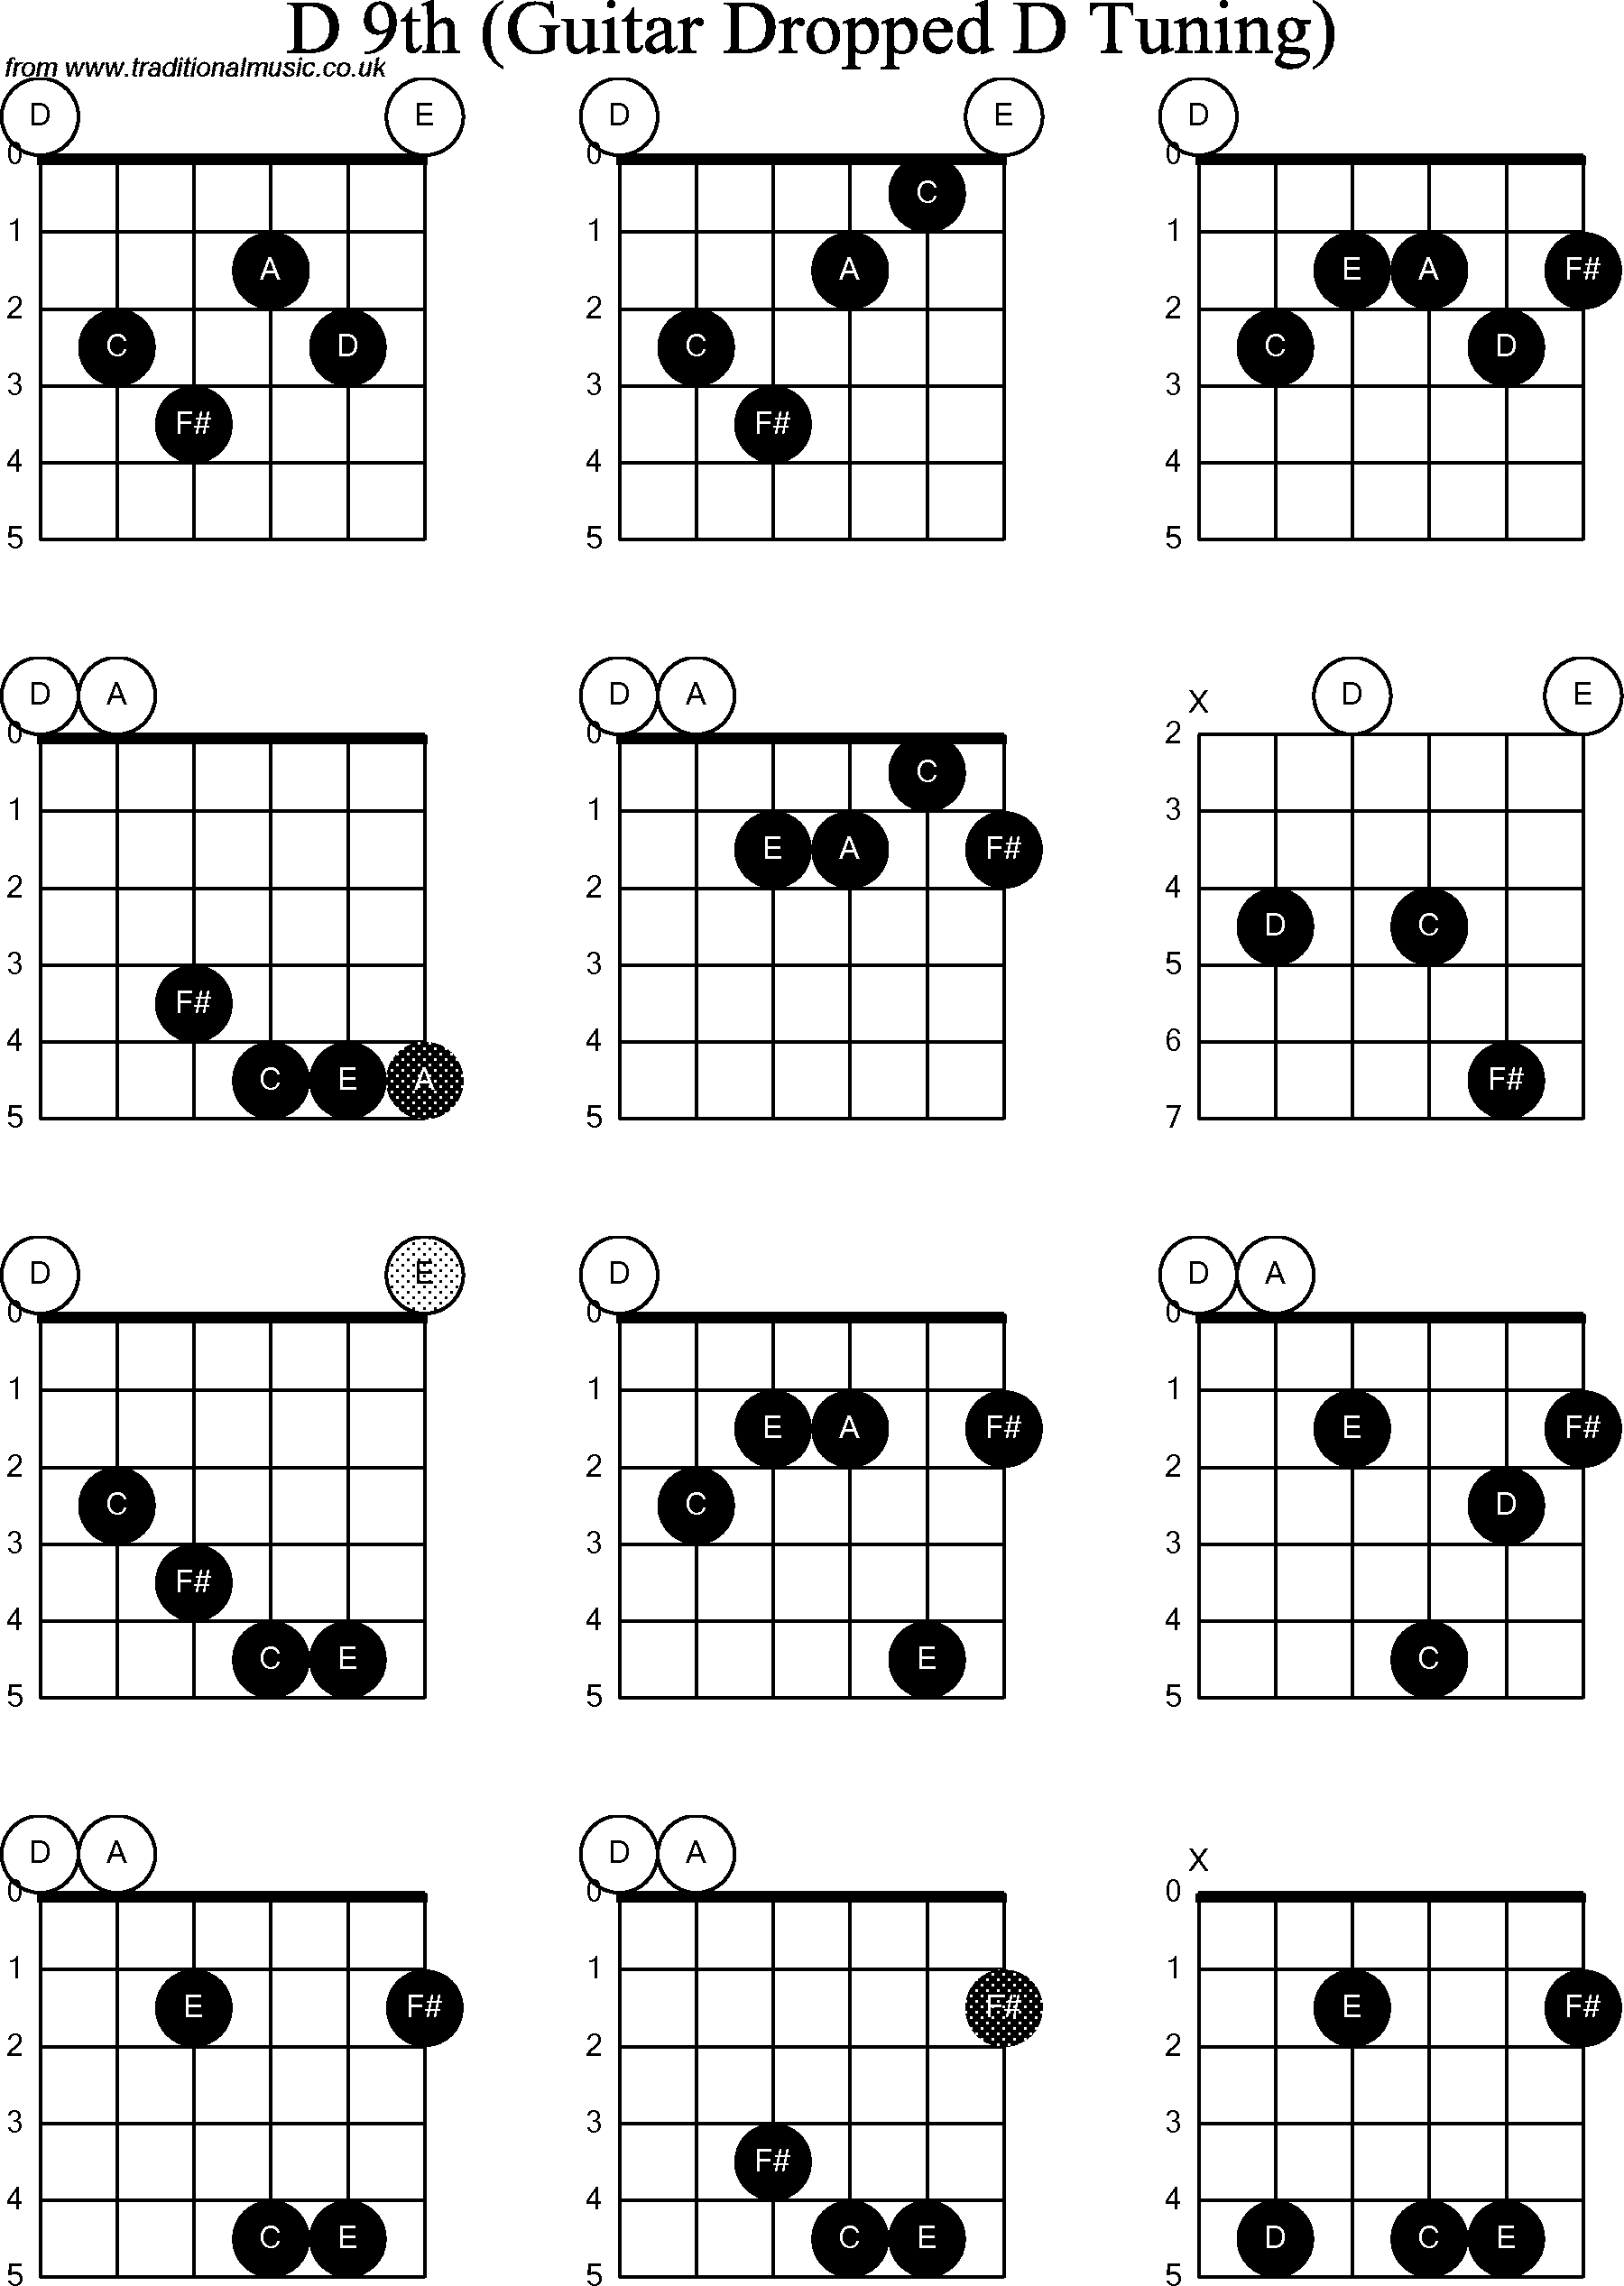 Chord Diagrams For Dropped D Guitardadgbe C Major7th